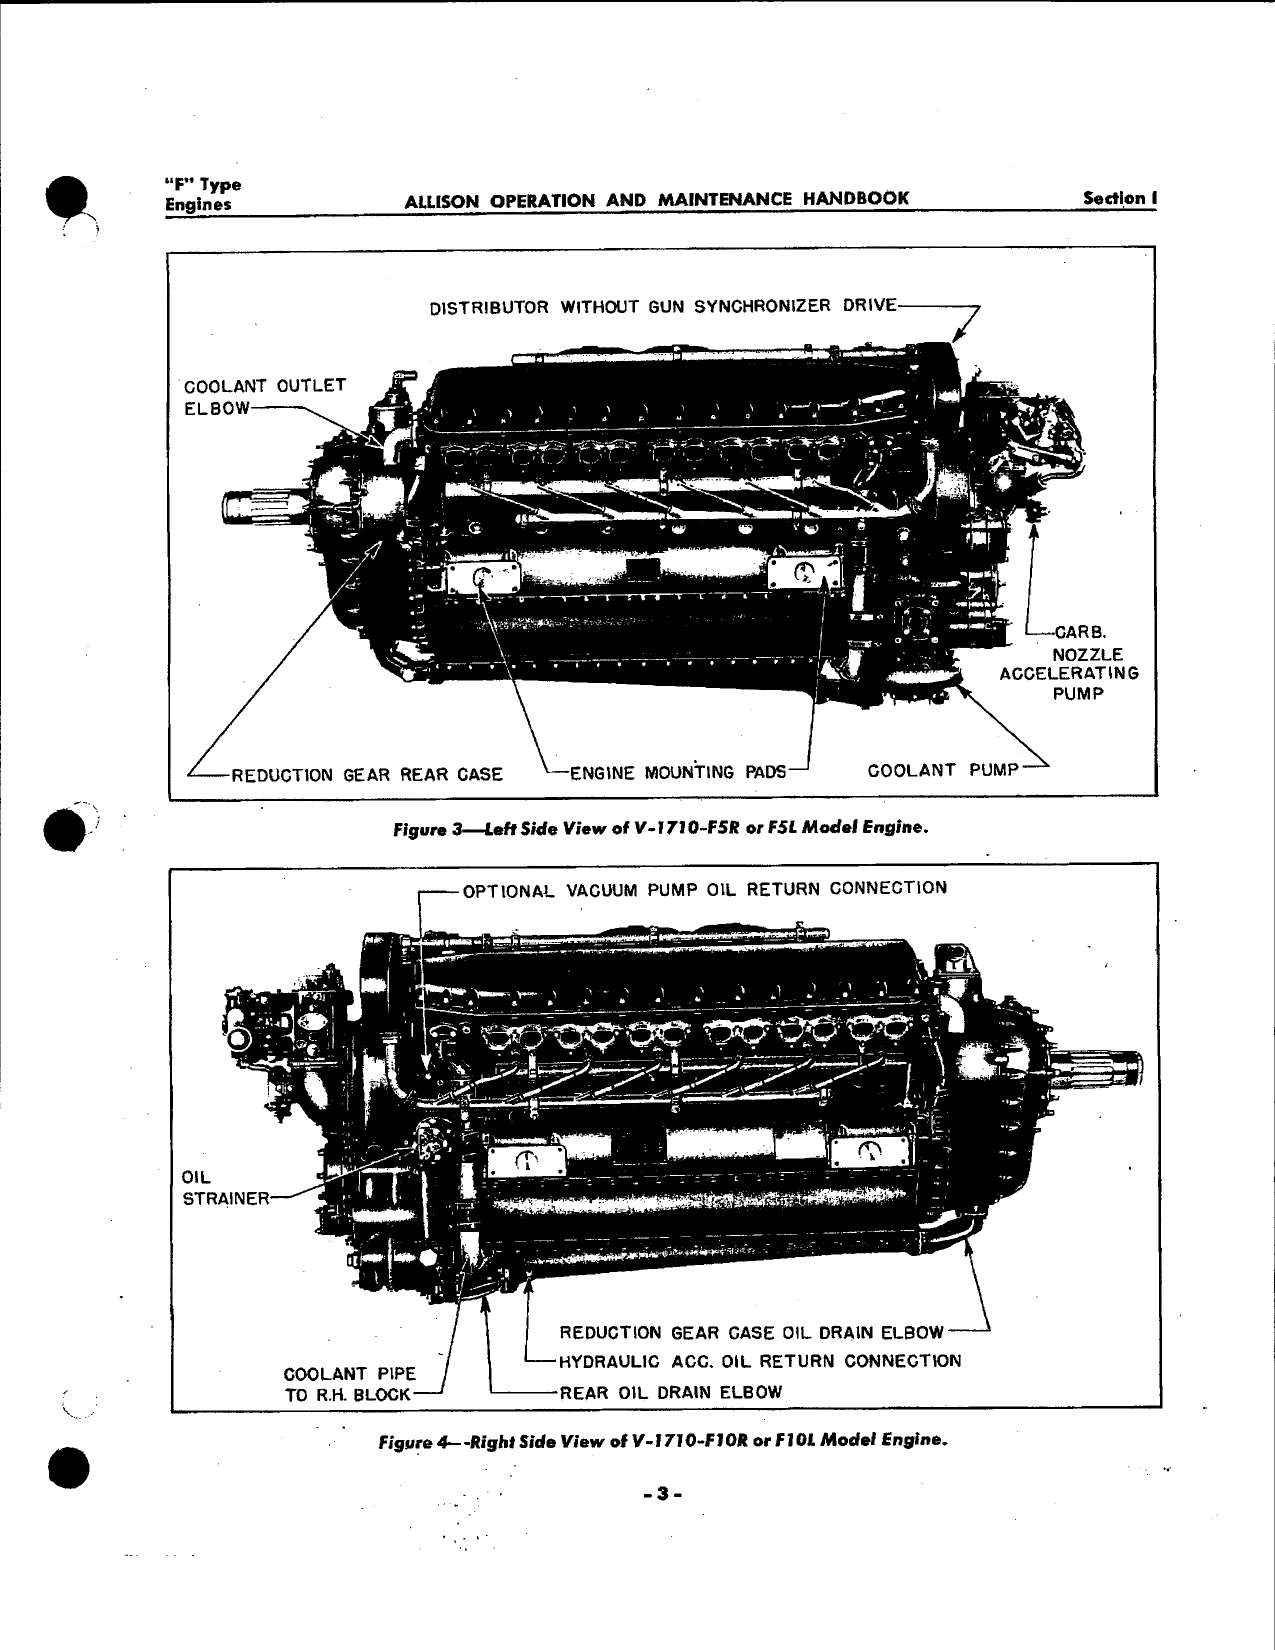 Sample page 9 from AirCorps Library document: Handbook of Operation and Maintenance for Allison V-1710 